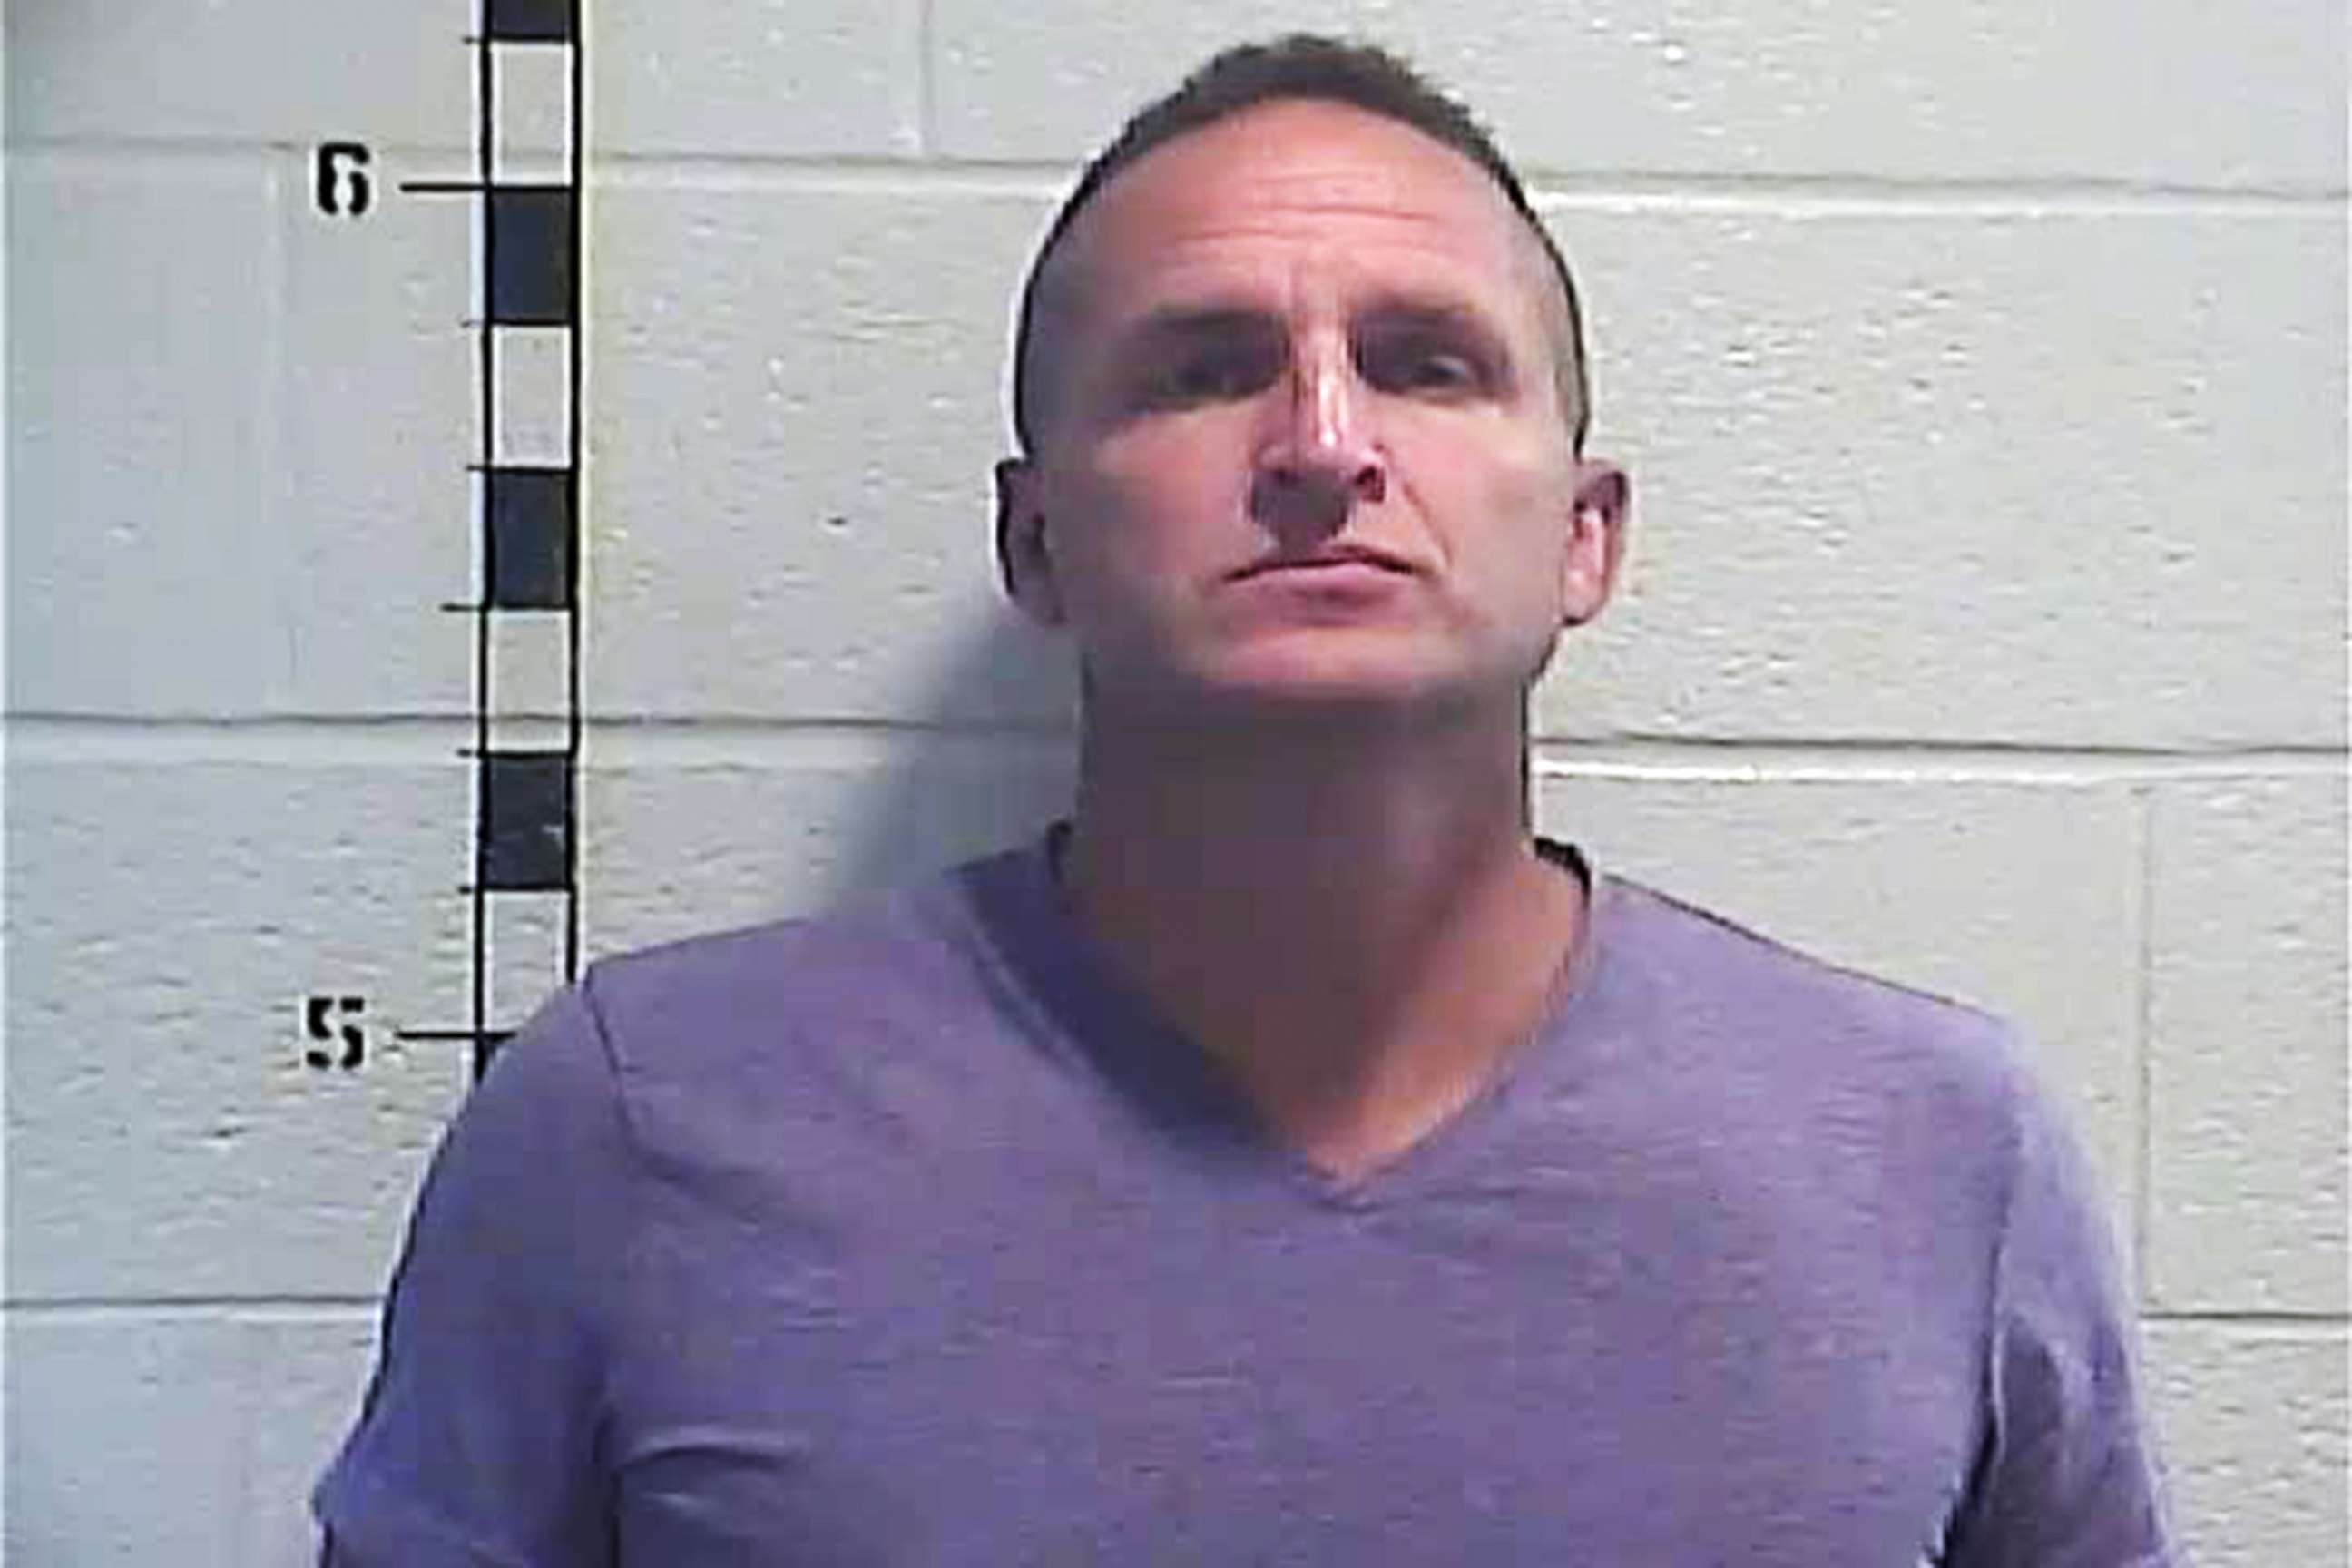 PHOTO: Former Louisville Metro Police Officer Brett Hankison is pictured in a booking photo released by the Shelby County Detention Center in Kentucky on Sept. 23, 2020.